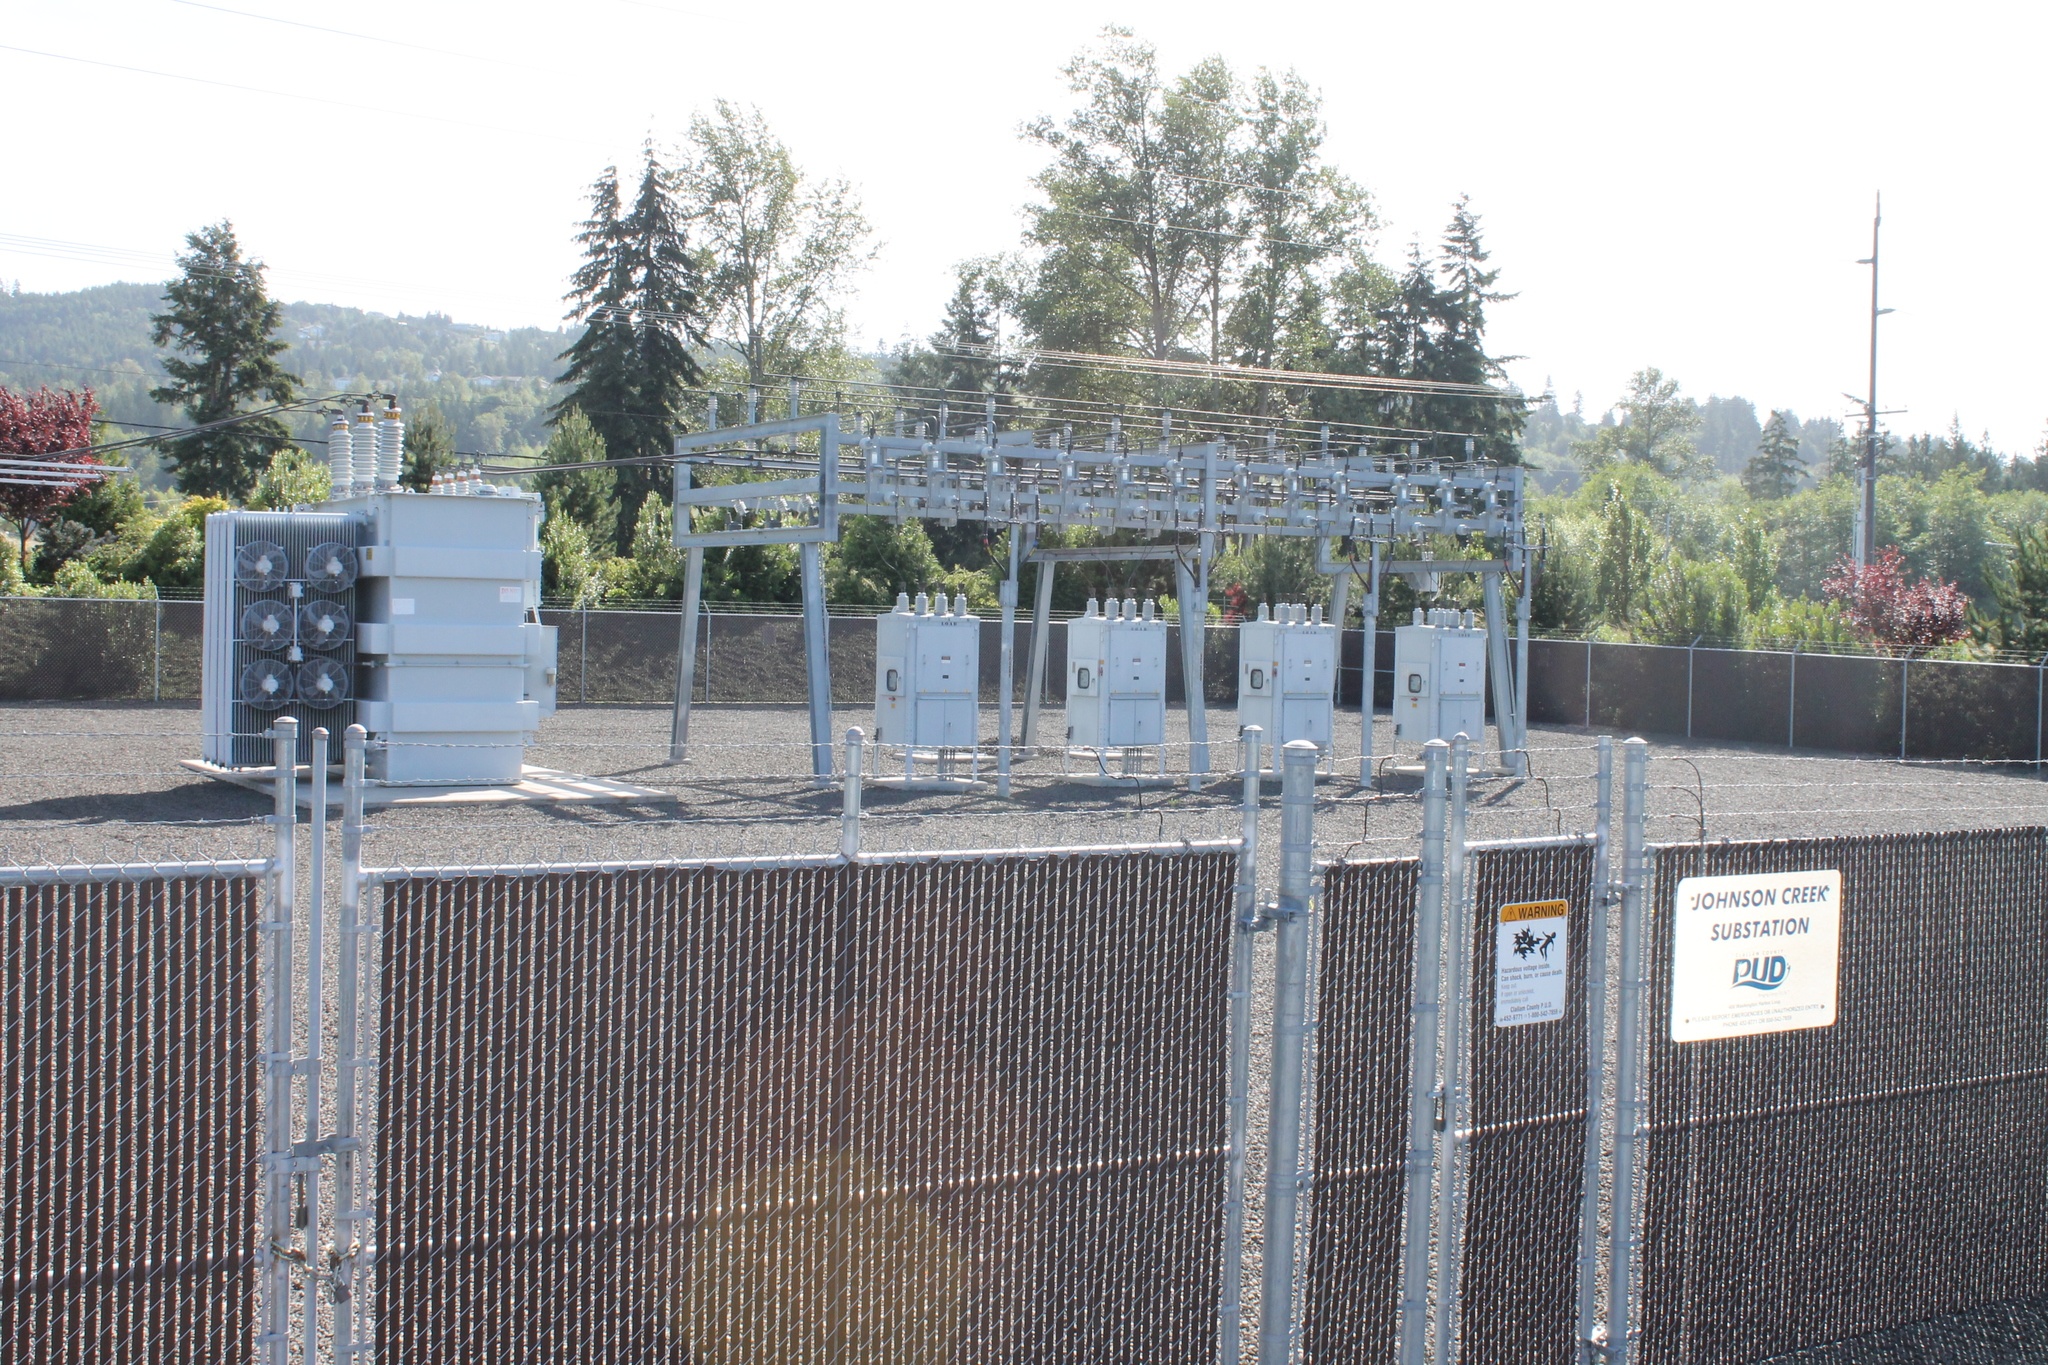 A proposed Clallam County PUD community solar projct would share space with the district’s Johnson Creek substation off Washington Harbor Loop in east Sequim. The project did not receive the 100-percent participation rate it needed to be approved